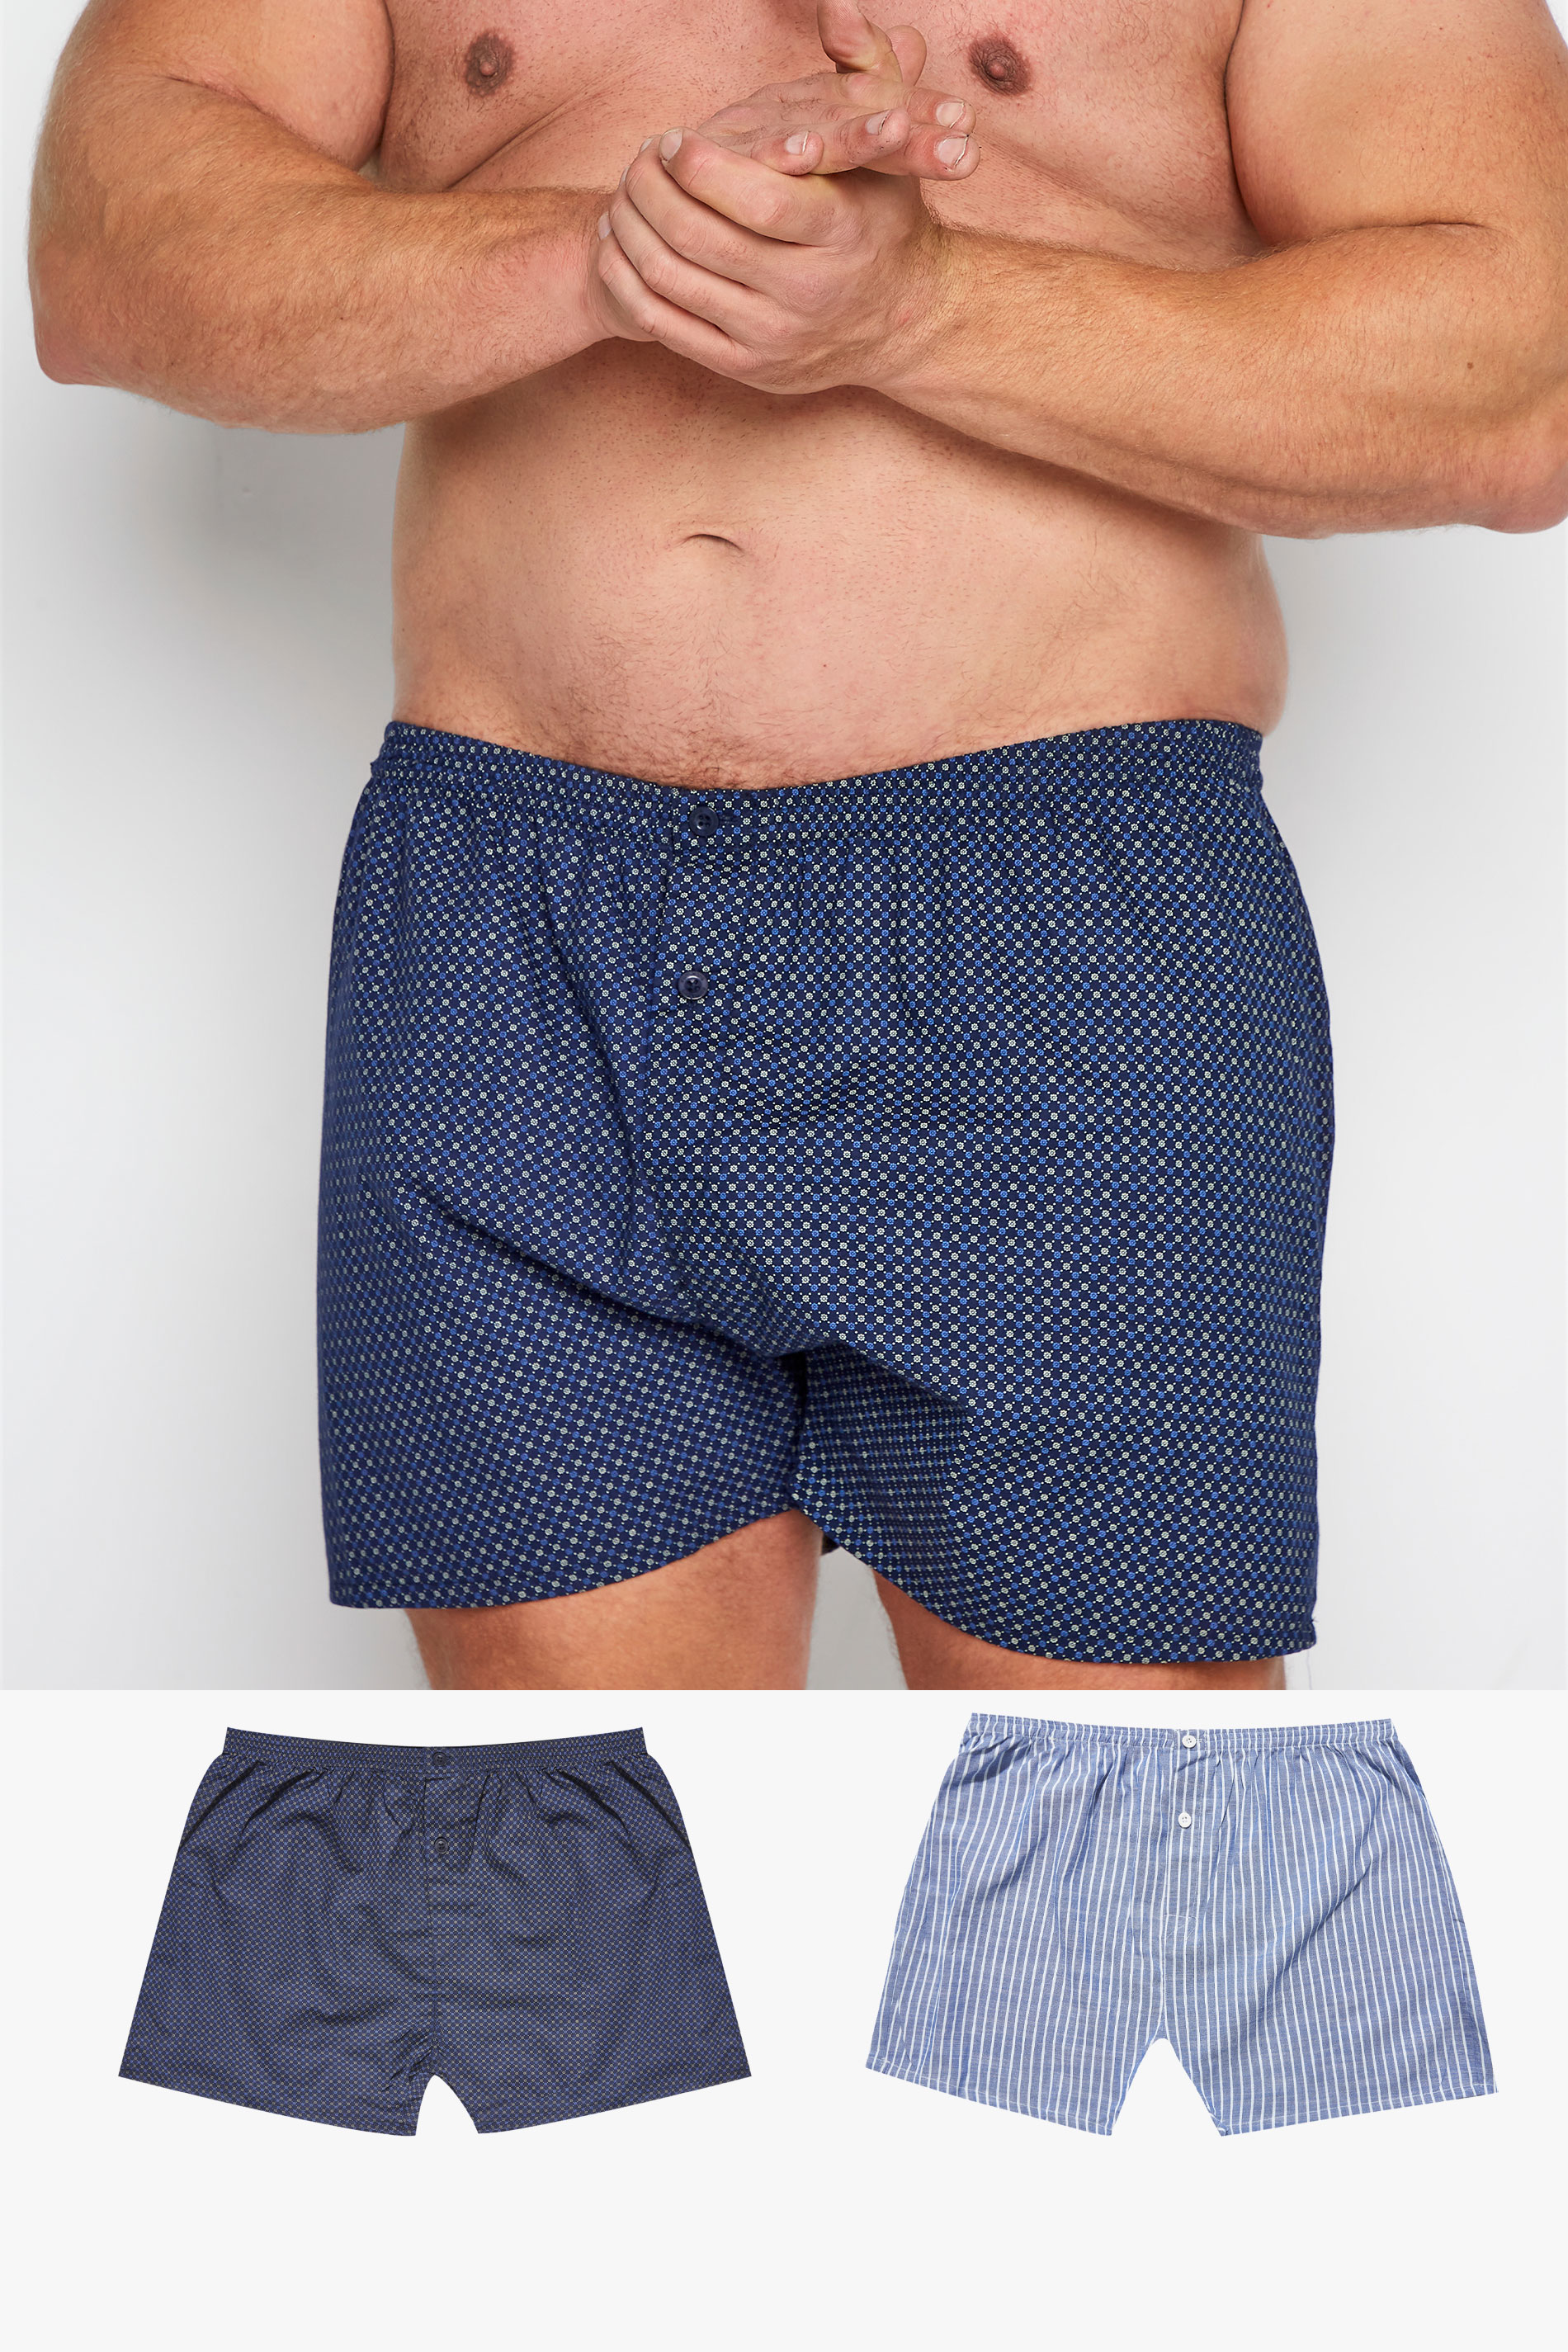 KAM Big & Tall 2 PACK Blue Woven Boxers 1